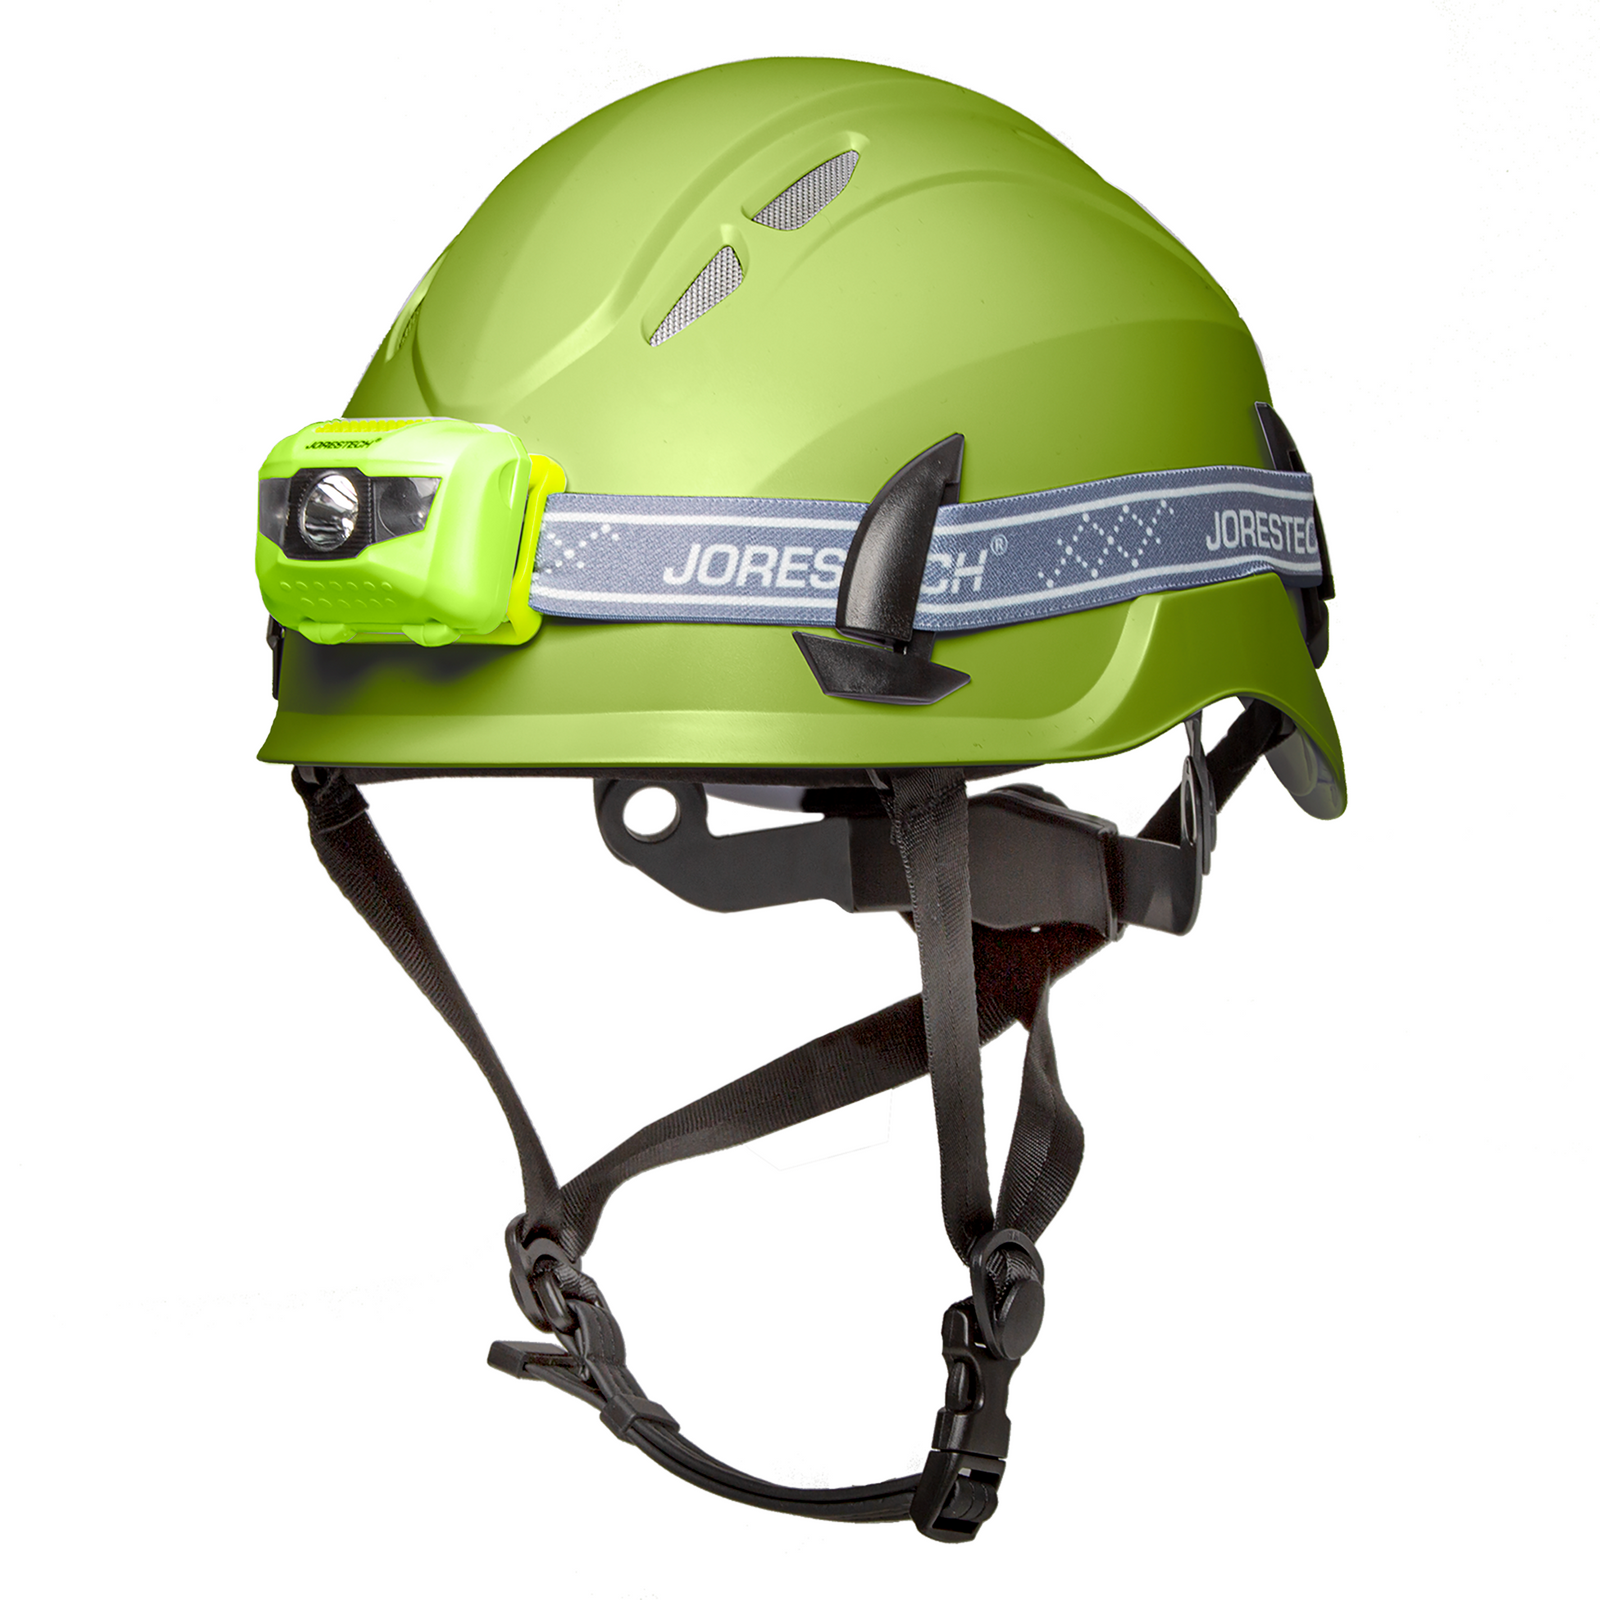 Diagonal view of a lime ventilated JORESTECH hard hat with chin strap and a lime water resistant headlamp bundle